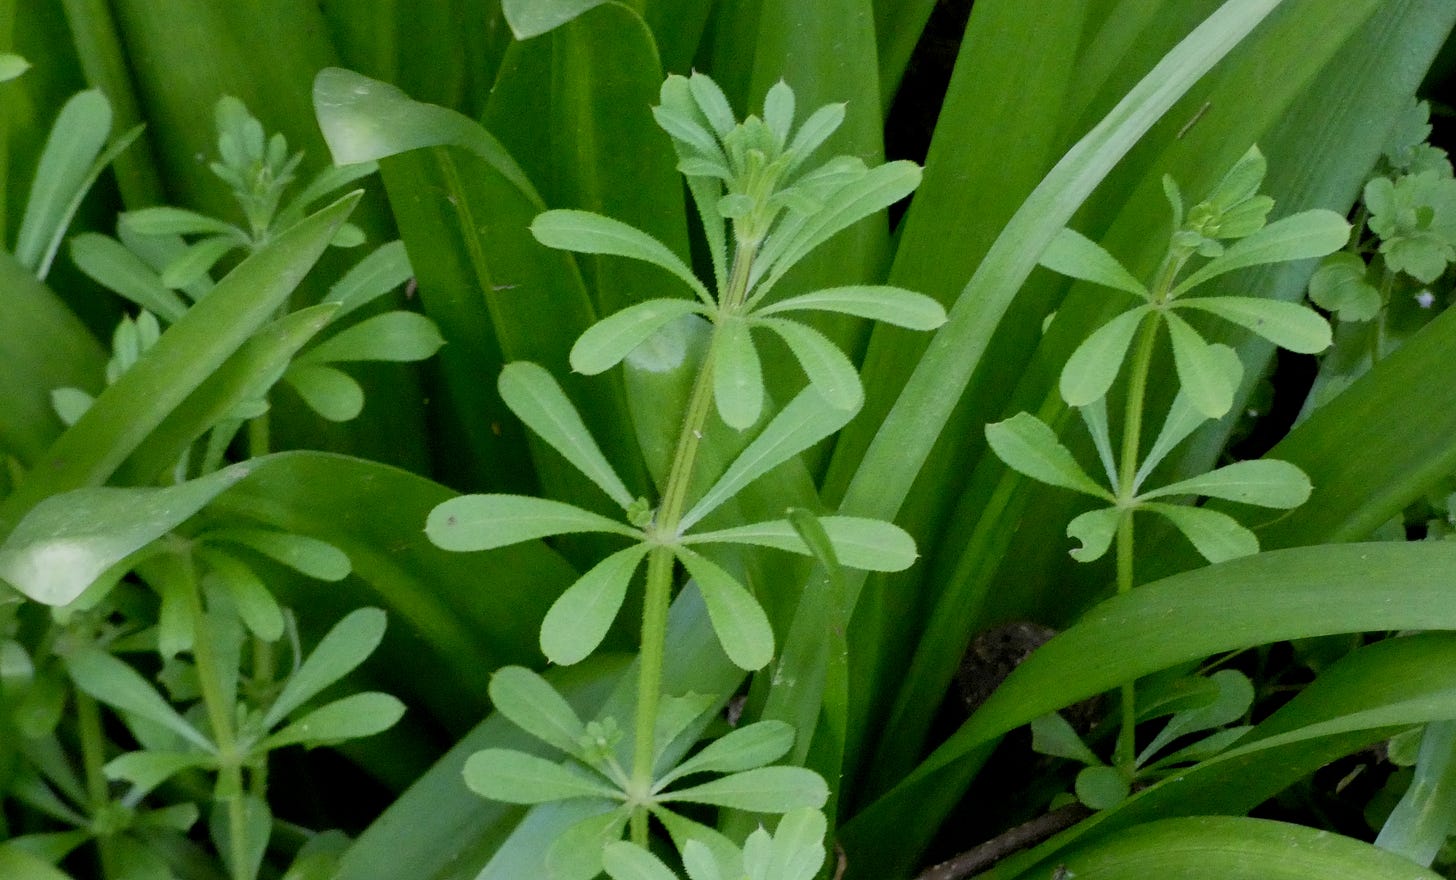 An image of cleavers, a weed with long, teardrop-shaped leaves growing out of the stem in whorls.